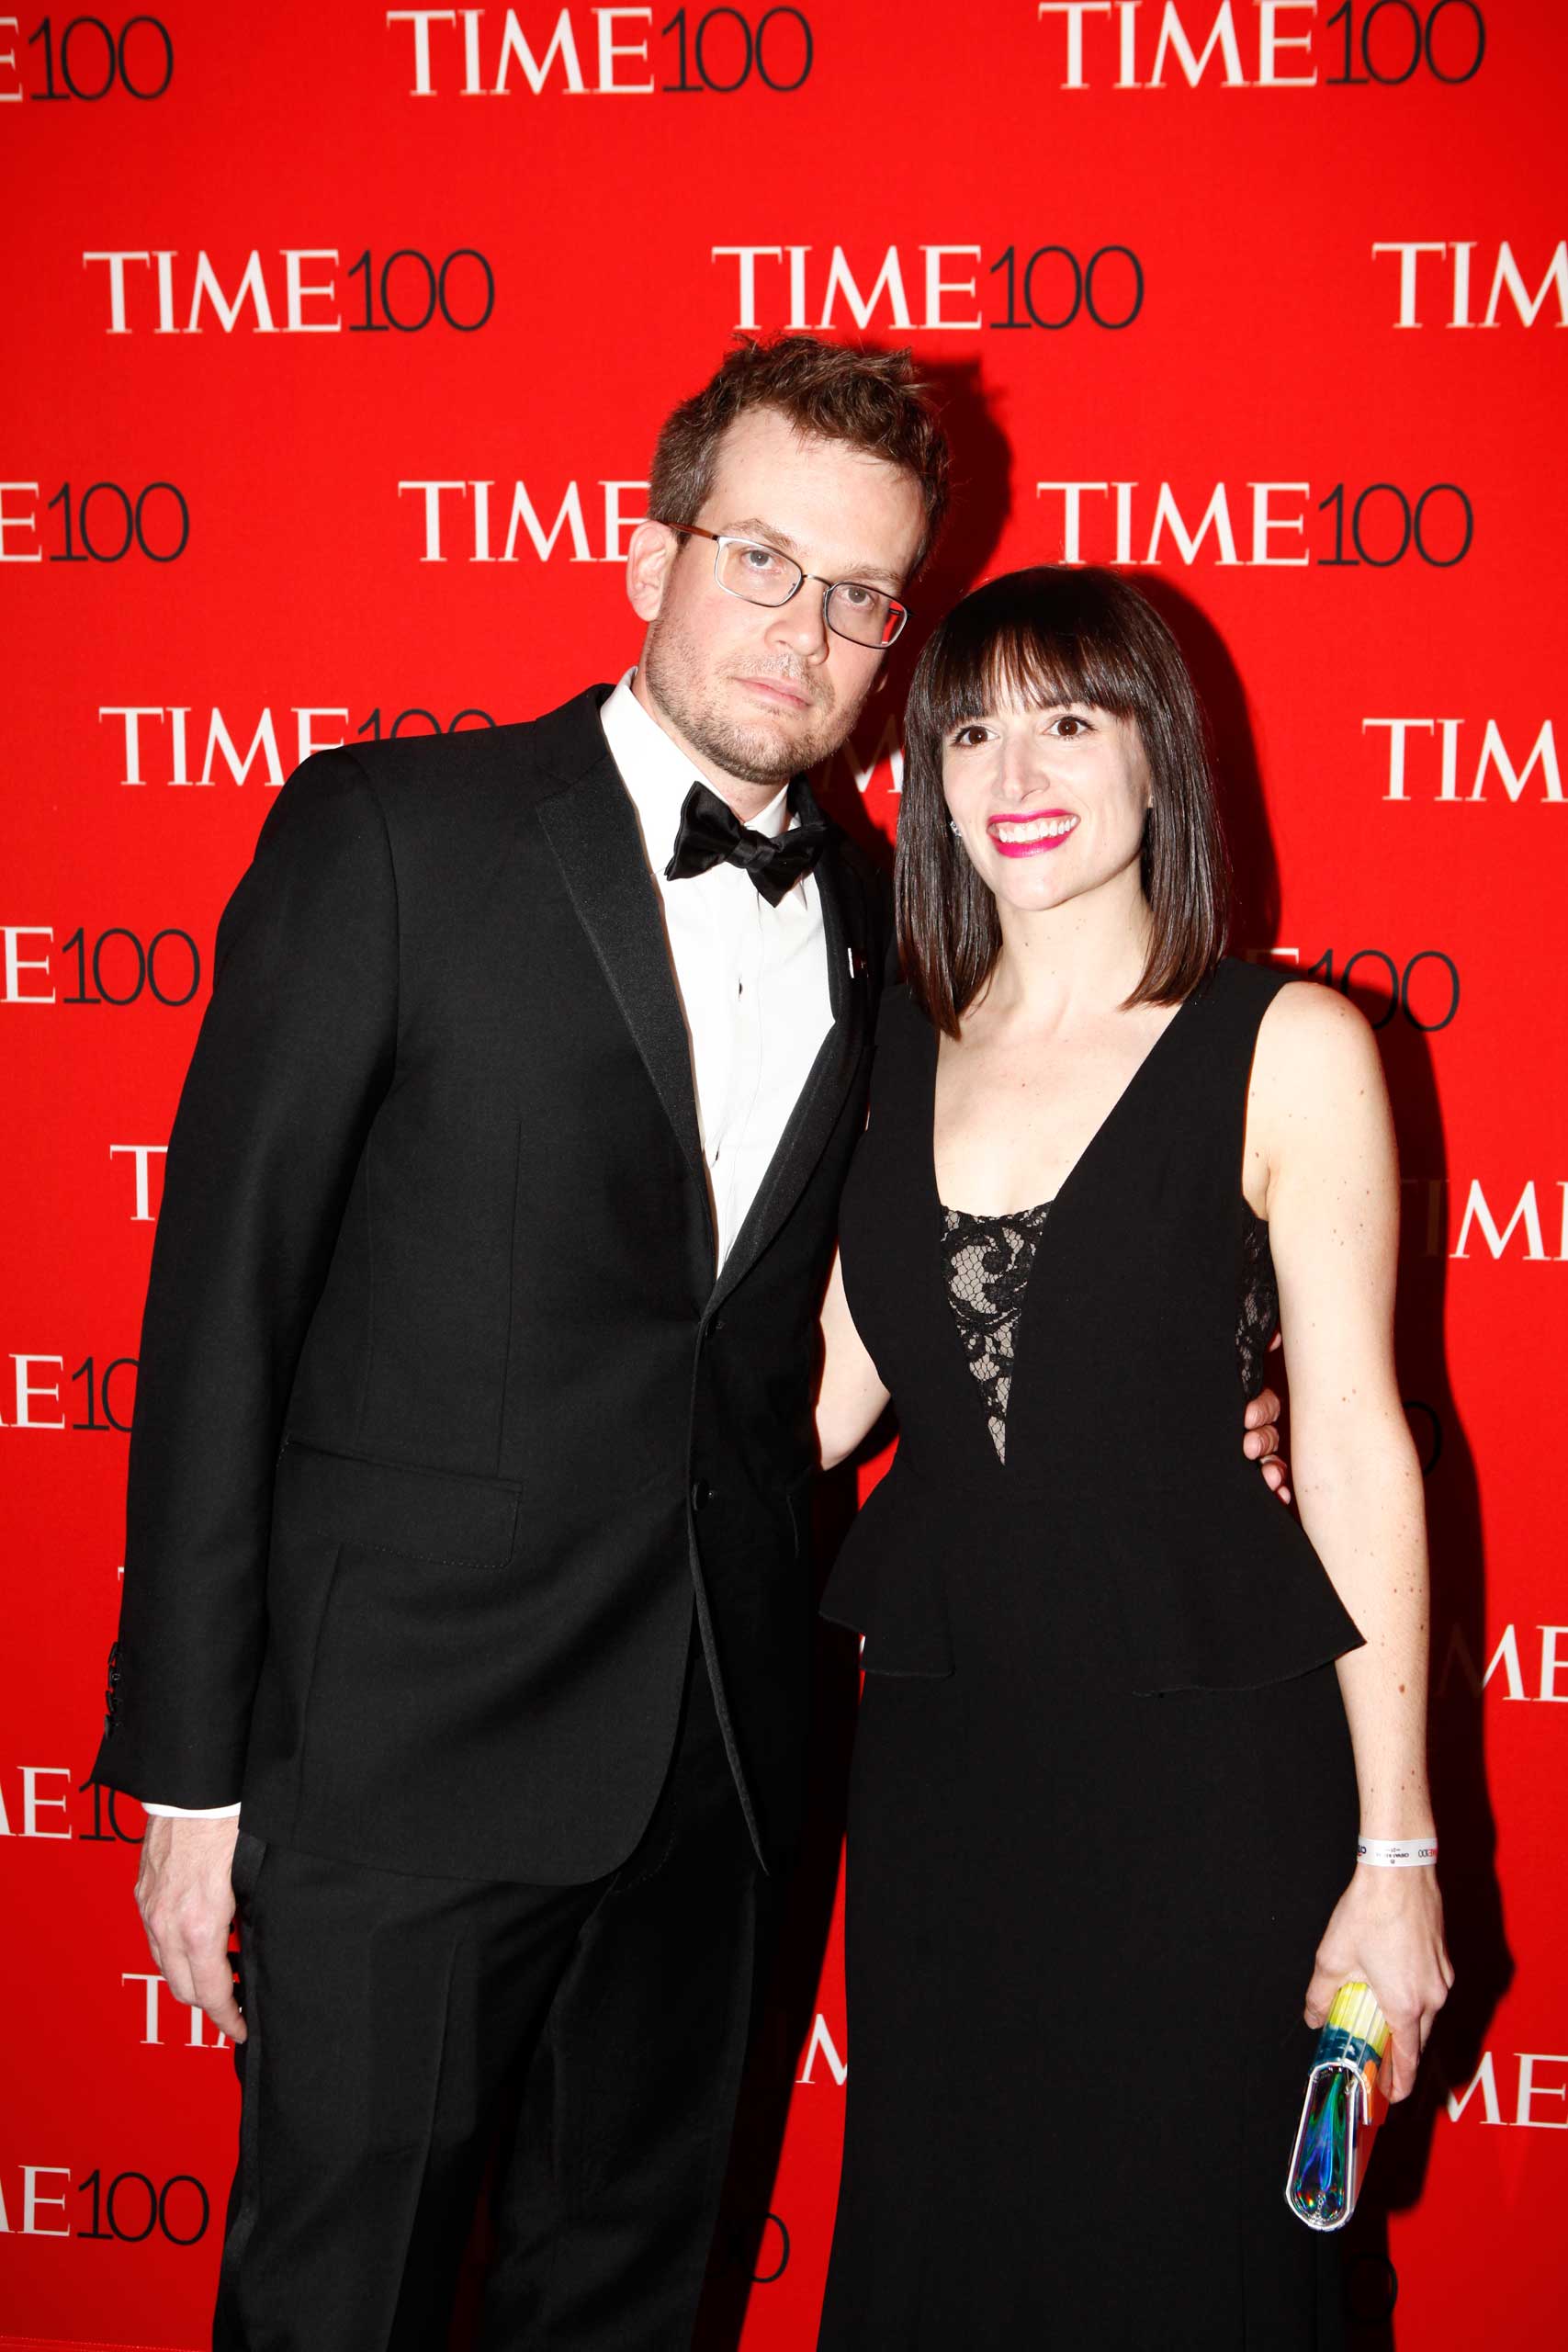 John Green and Sarah Urist Green attend the TIME 100 Gala at Jazz at Lincoln Center in New York City on Apr. 21, 2015. (Andrew Hinderaker for TIME)